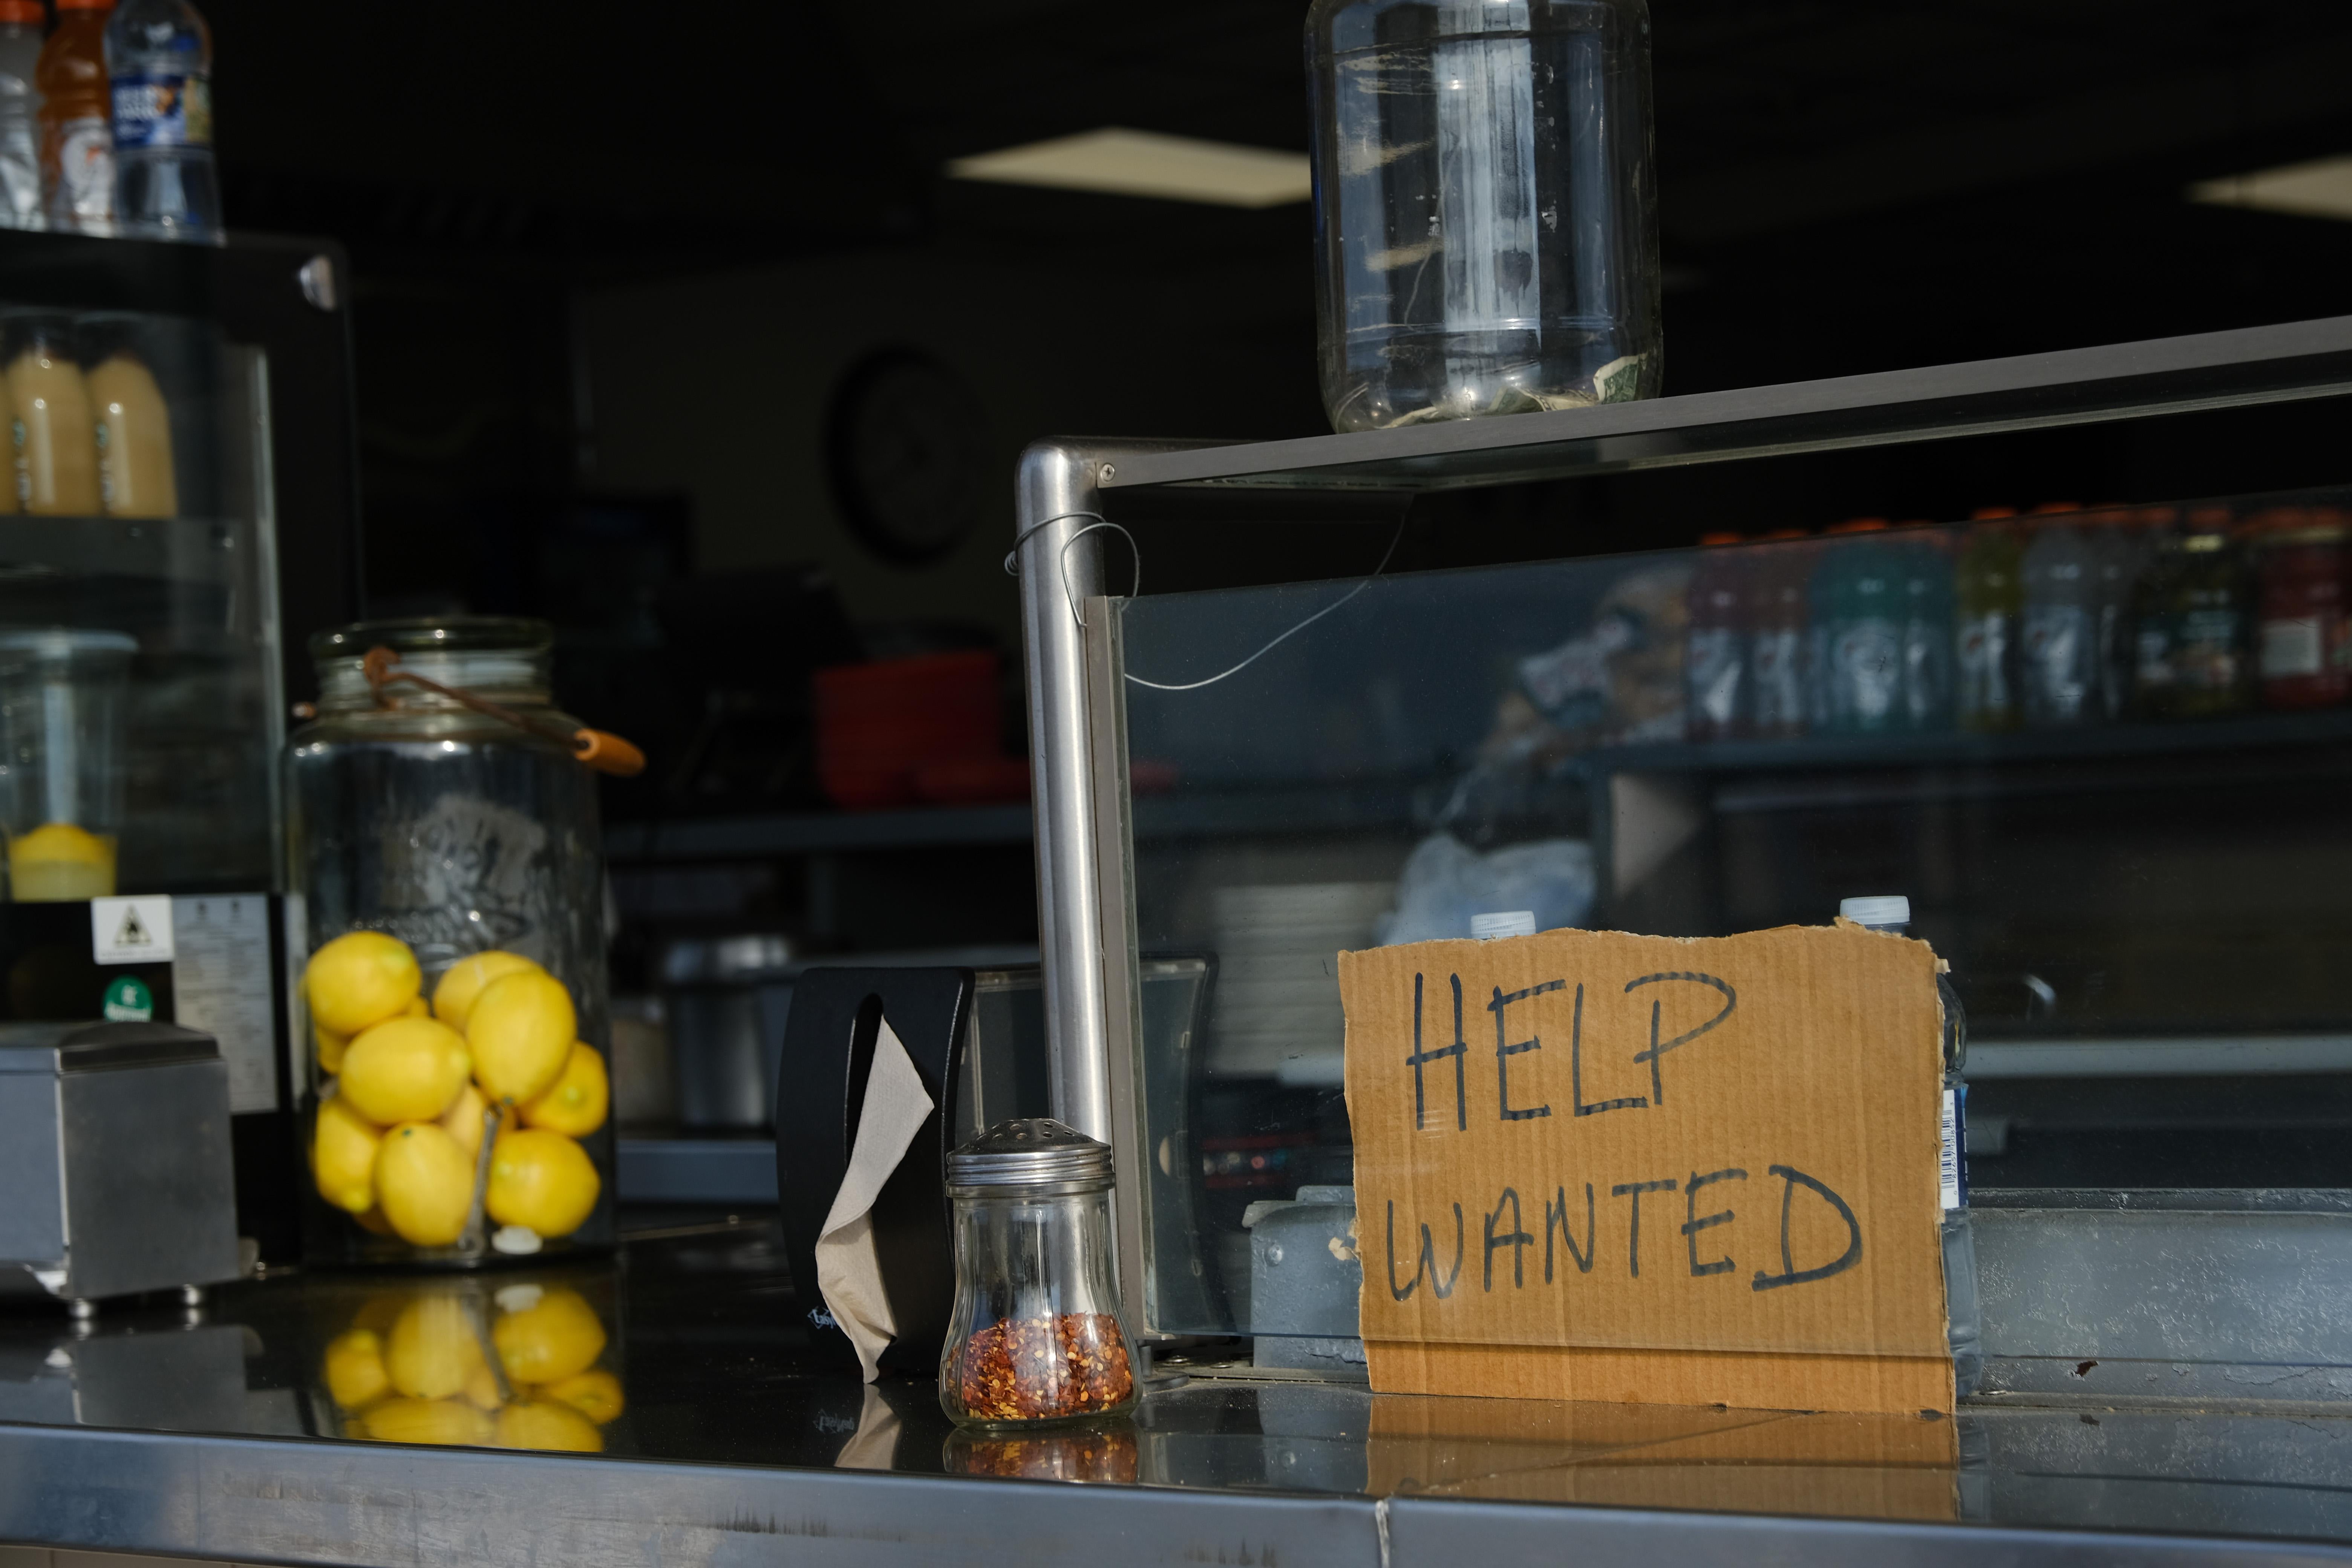 A cardboard "help wanted" sign on a counter inside a boardwalk restaurant in Wildwood, New Jersey